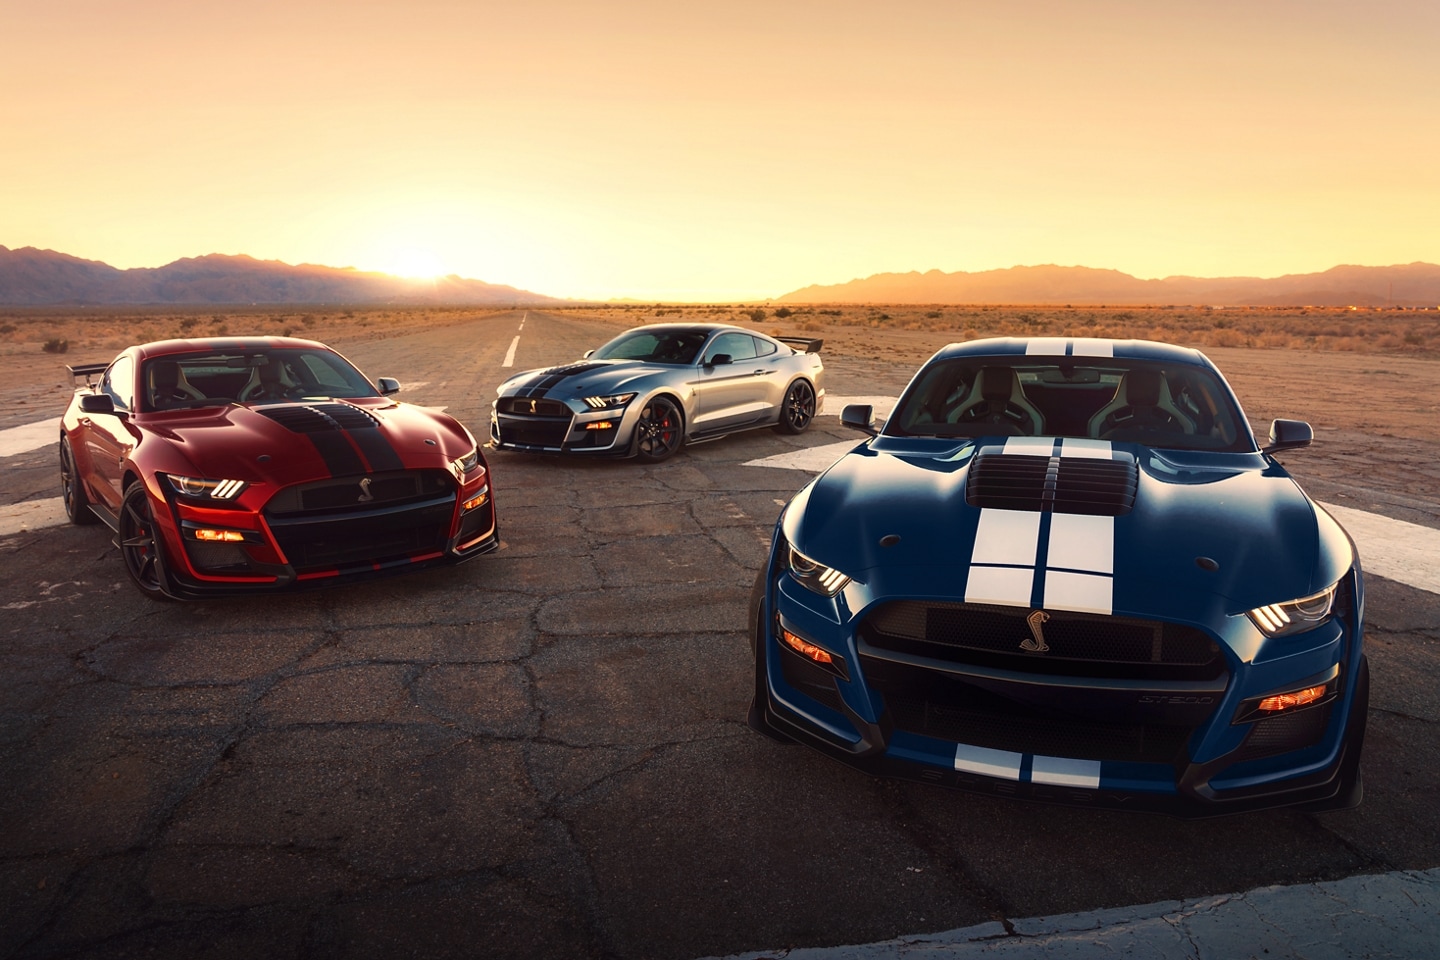 https://www.ford.com/is/image/content/dam/vdm_ford/live/en_us/ford/nameplate/mustang/2021/collections/dm/21_FRD_MST_DSC00602.tif?croppathe=1_3x2&wid=1440